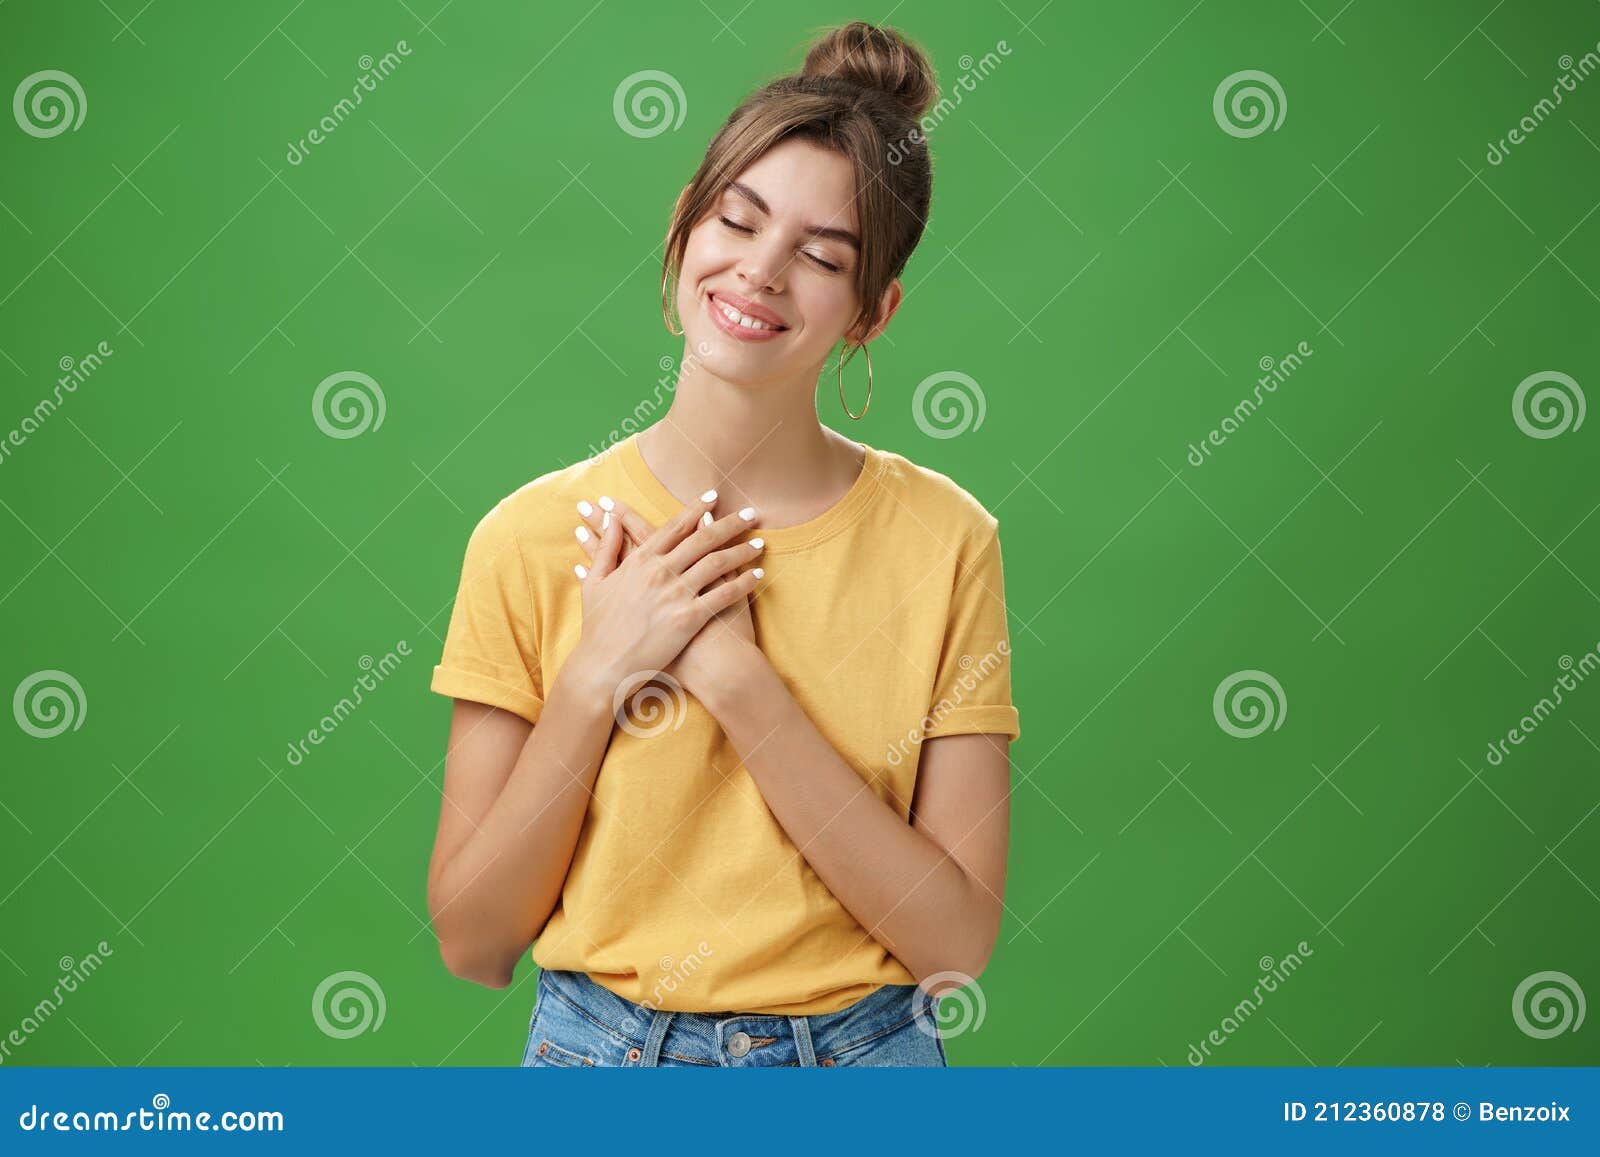 https://thumbs.dreamstime.com/z/happy-kind-timid-young-attractive-woman-gapped-teeth-smiling-sincere-grateful-closing-eyes-pressing-hands-happy-kind-212360878.jpg